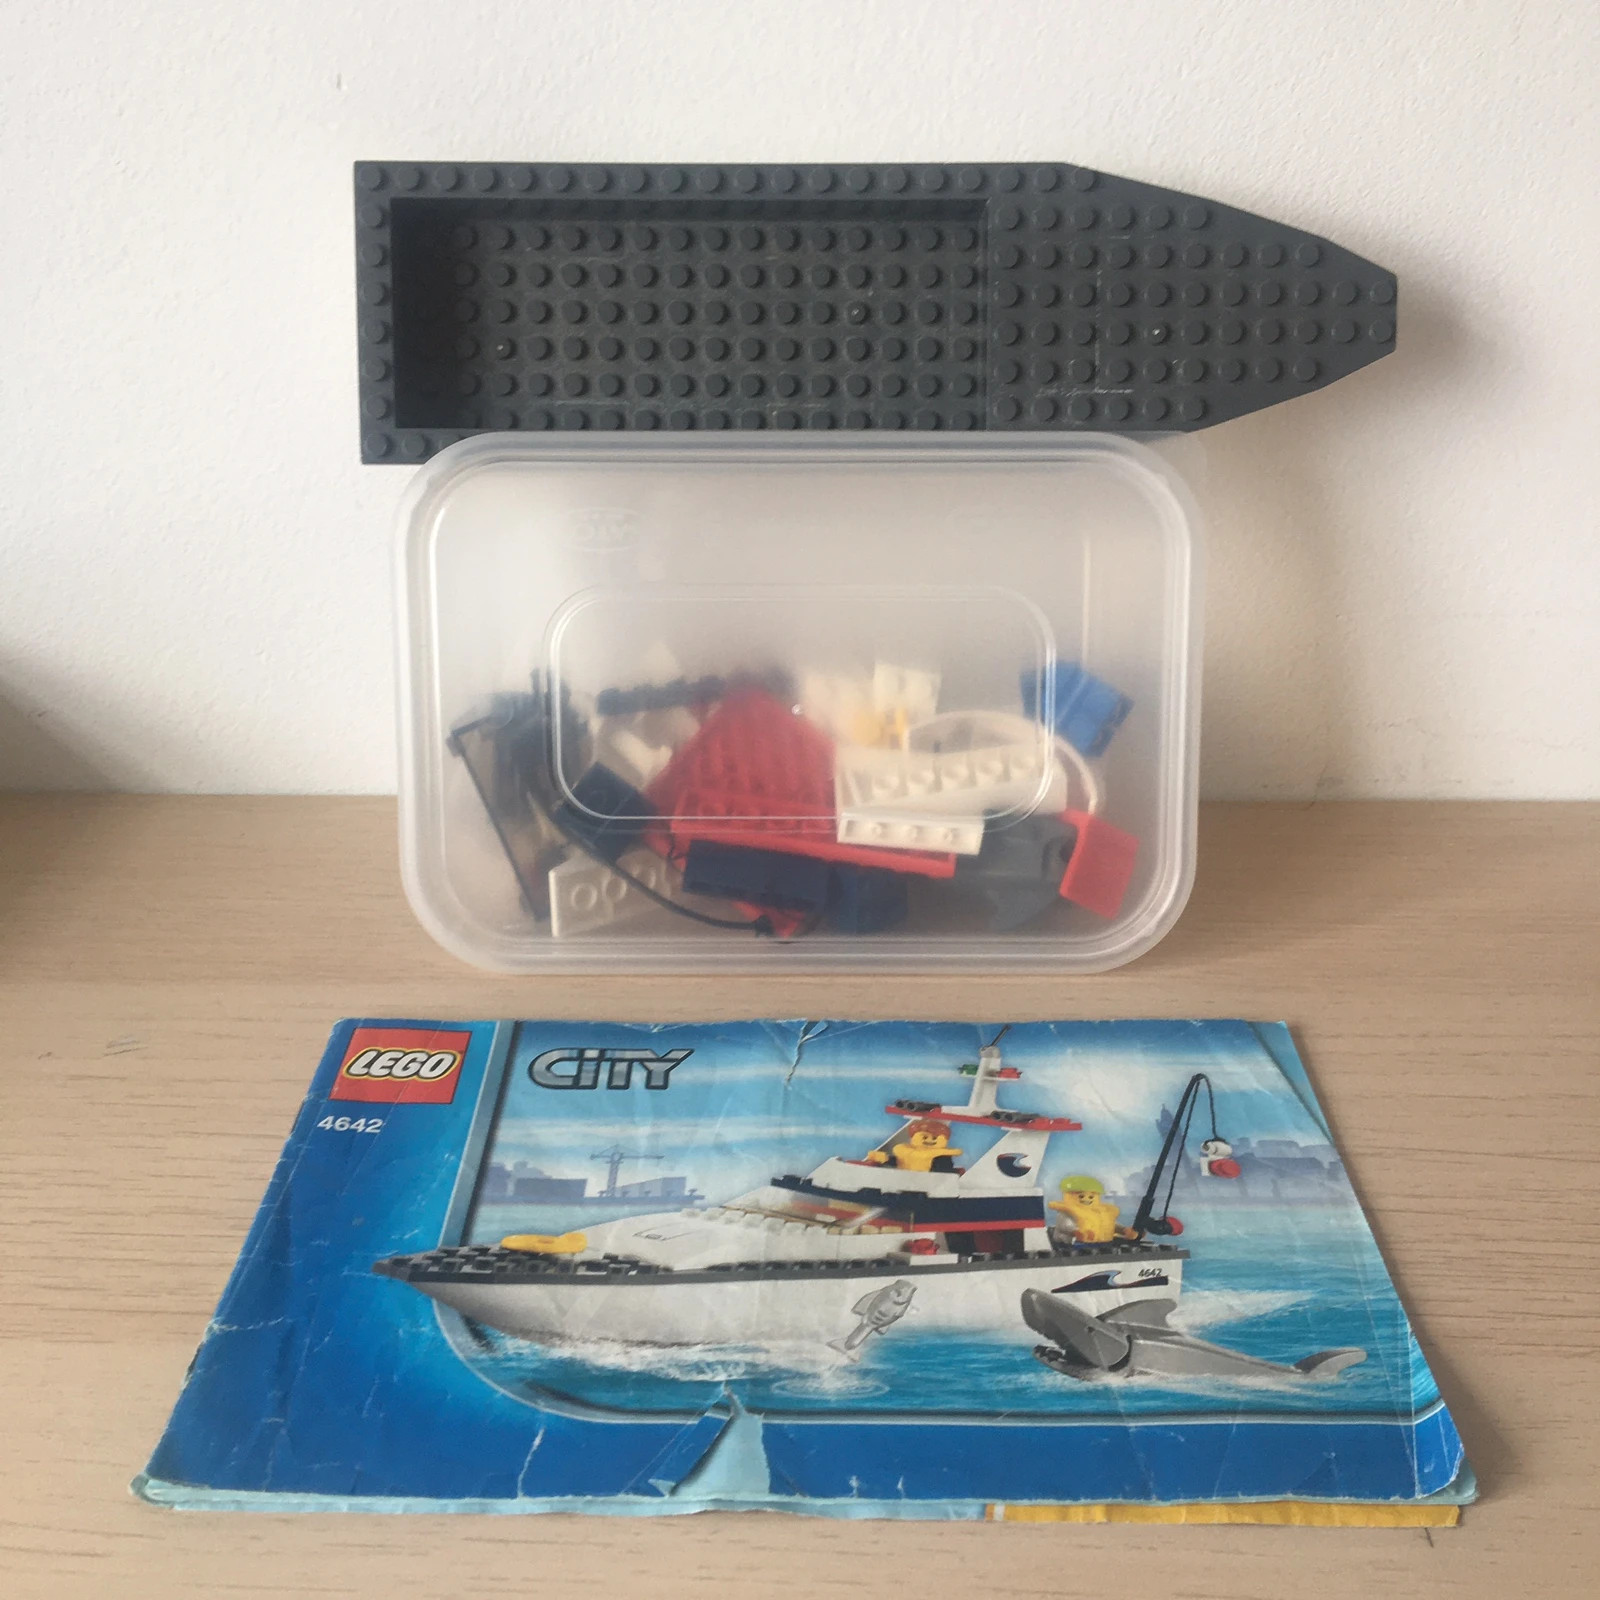 100% Complete LEGO CITY: Fishing Boat (4642) w/out Box